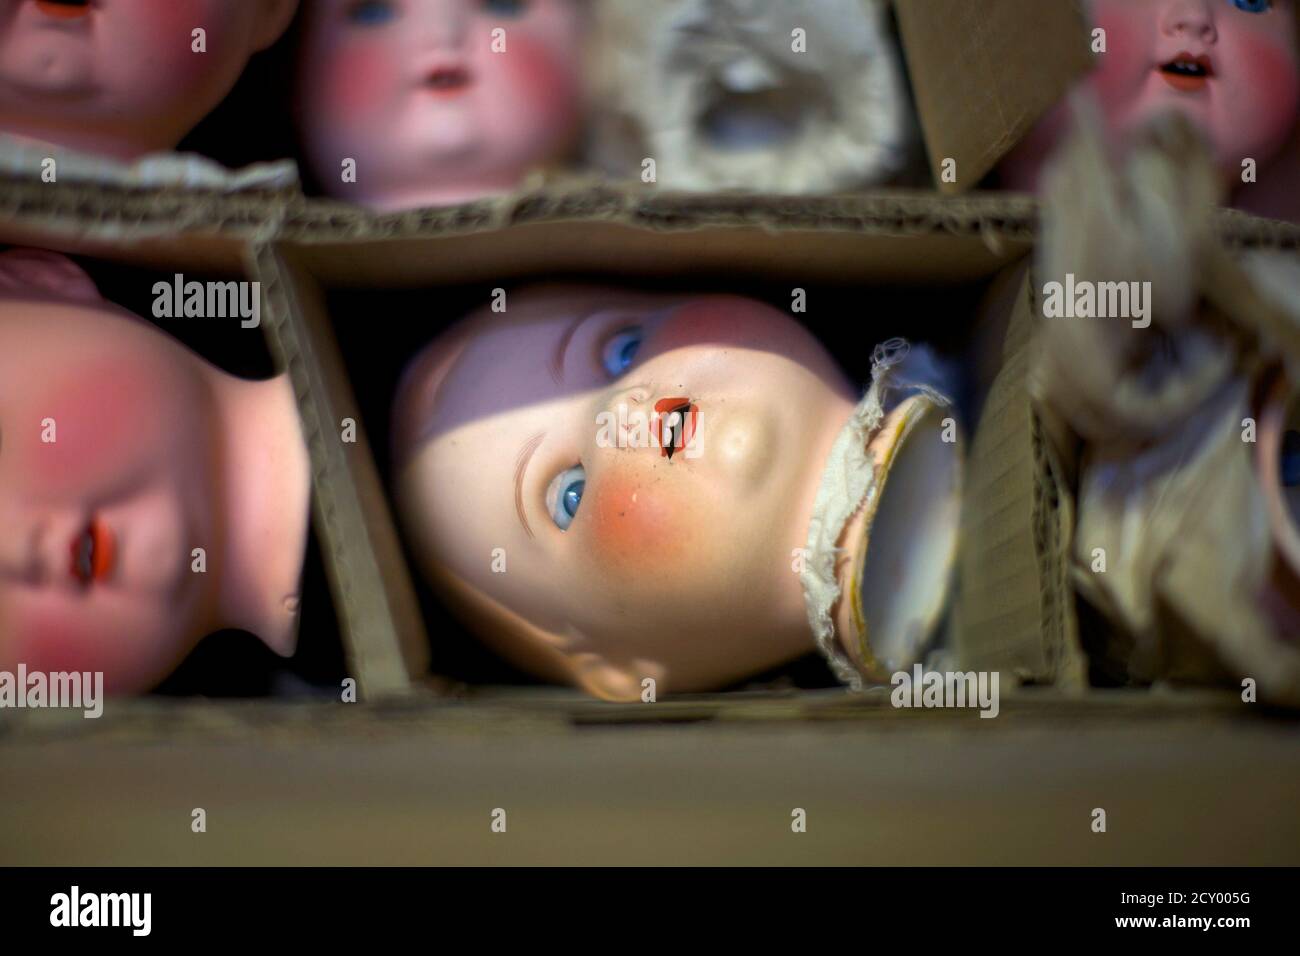 Dolls heads, to be used in future doll repairs, are pictured in storage at Sydney's Doll Hospital June 24, 2014. The Doll Hospital, a family business over 100 years old, employs a handful of skilled workers to restore and repair people's childhood treasures. In an age where plastic dolls are mass produced, few dolls hospitals around the world have survived.  Picture taken June 24, 2014.   REUTERS/Jason Reed   (AUSTRALIA - Tags: SOCIETY) Stock Photo